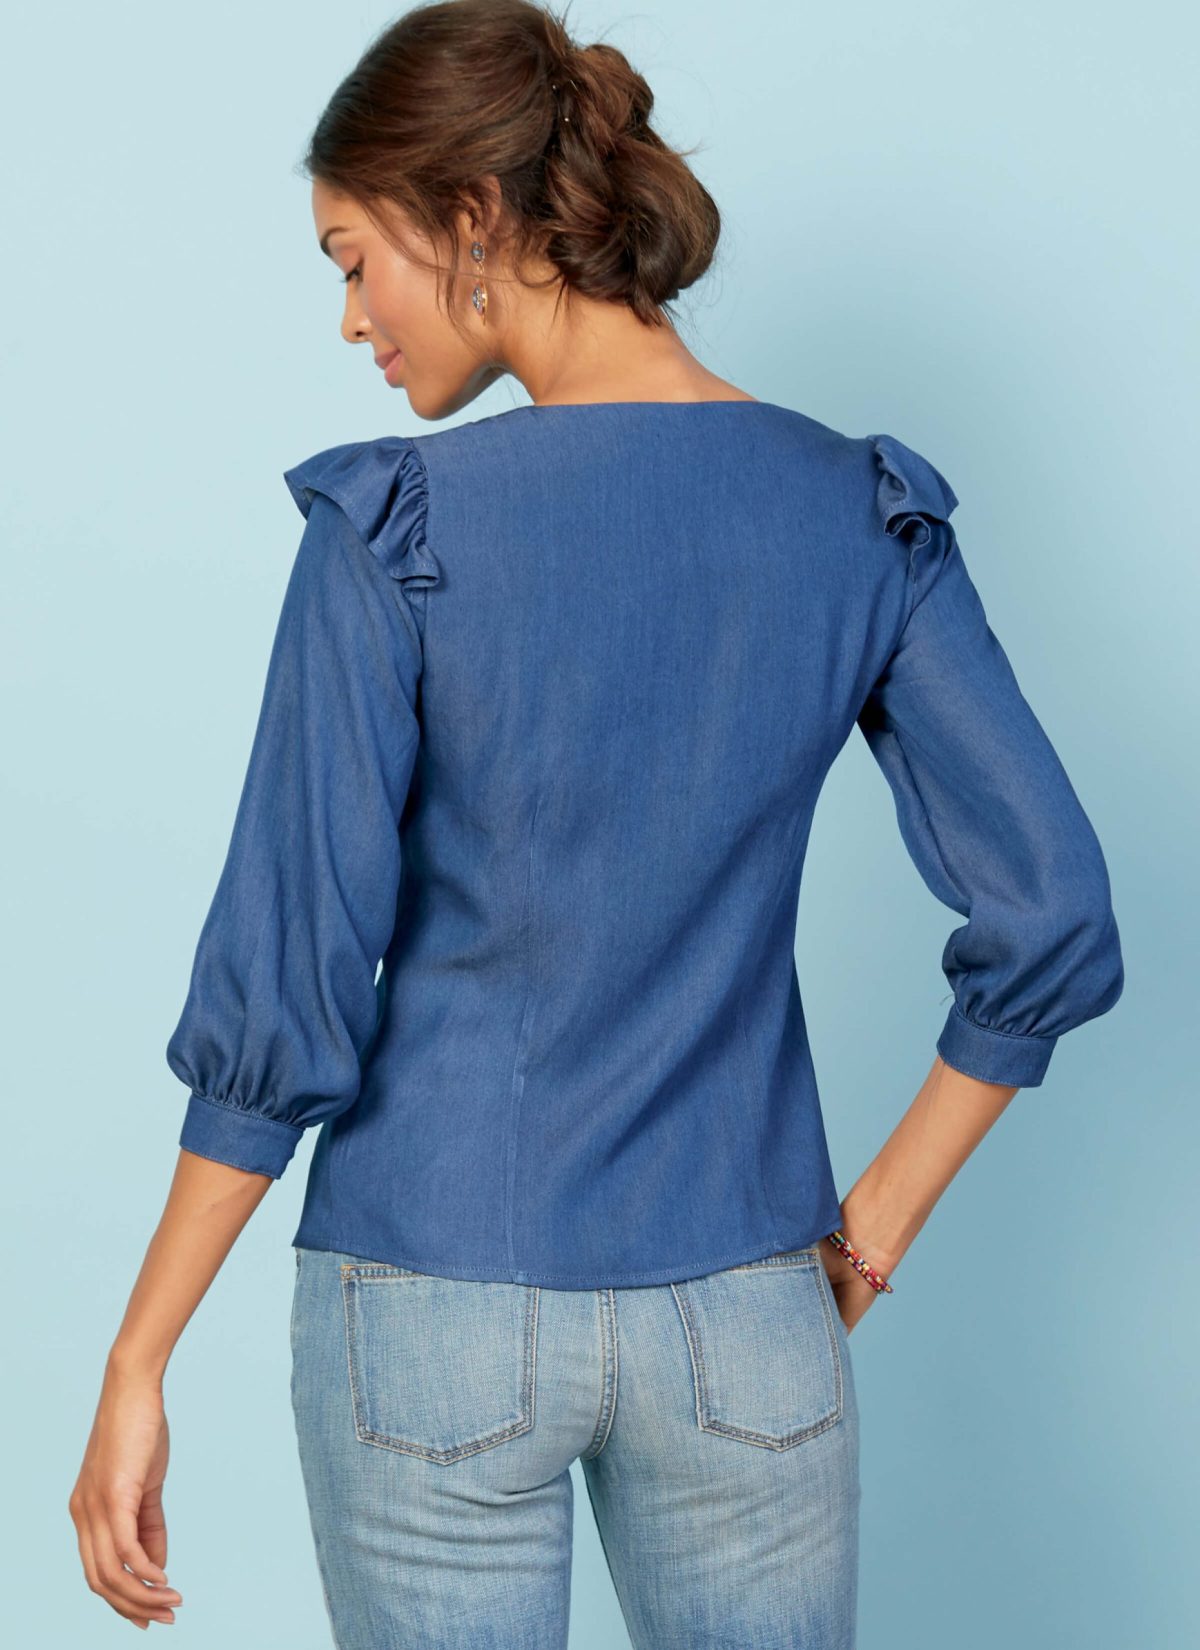 McCall's Sewing Pattern M7900 Misses' Tops